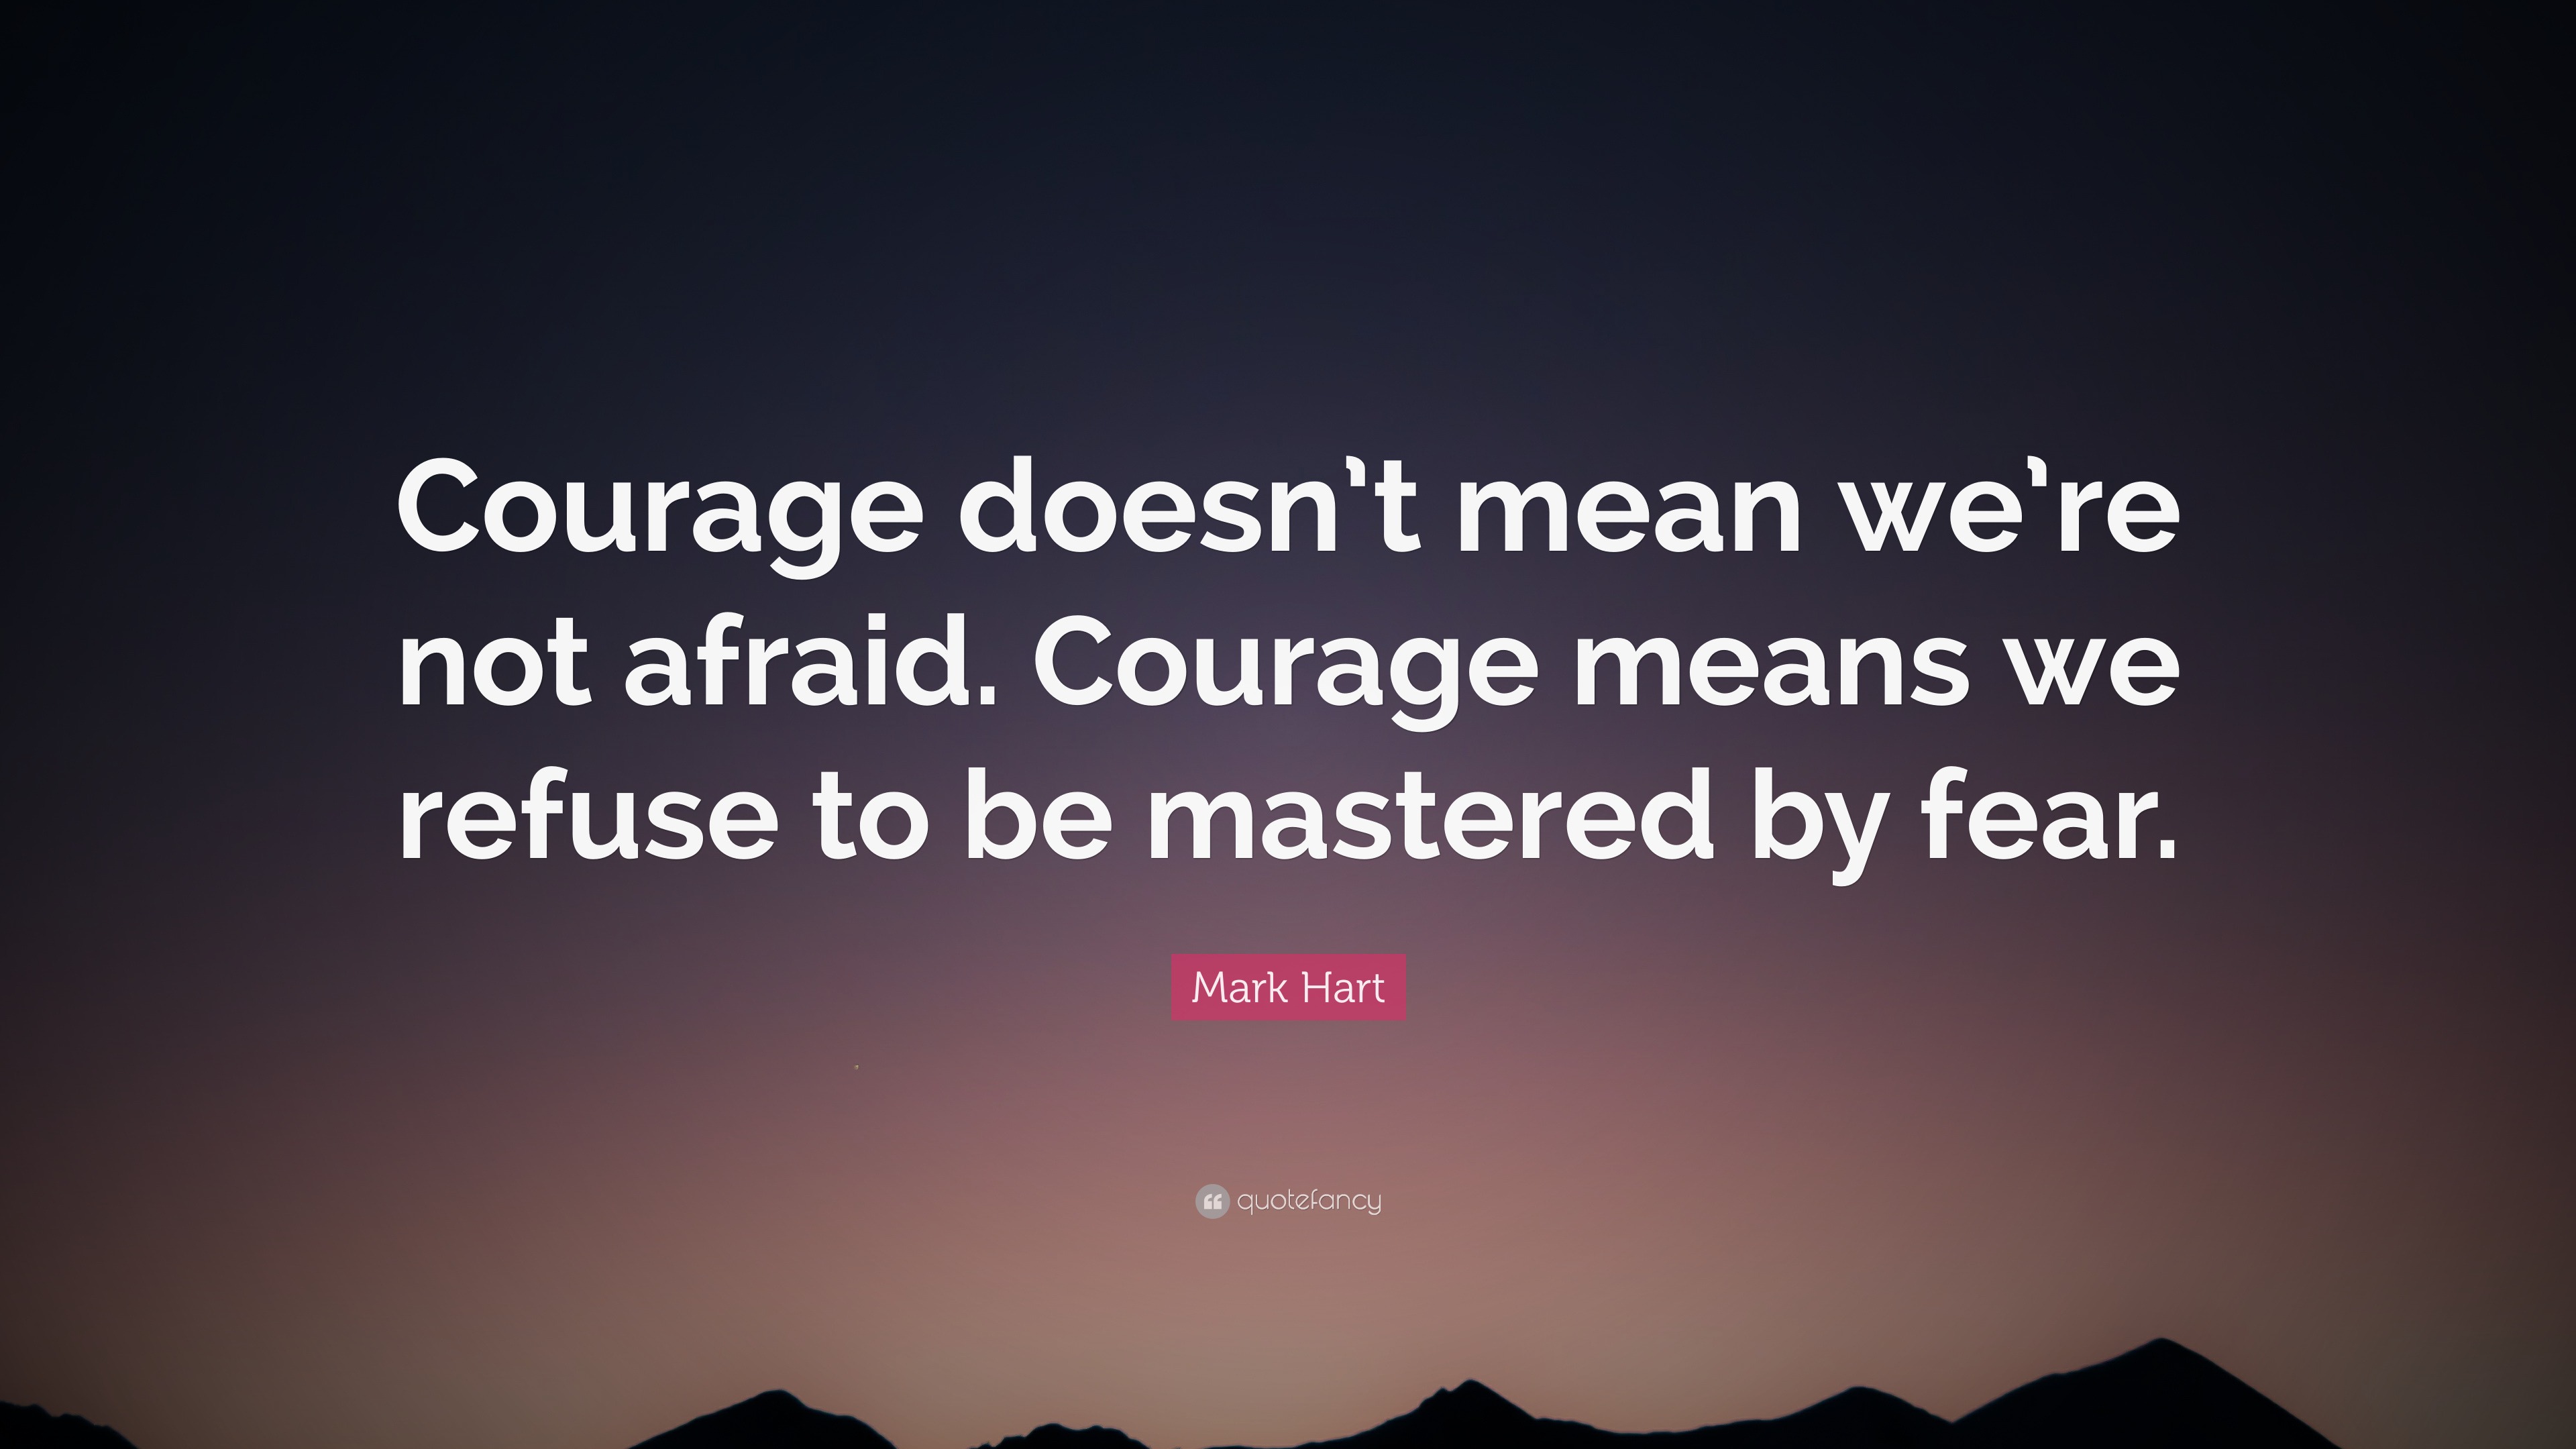 Mark Hart Quote: “Courage doesn’t mean we’re not afraid. Courage means ...